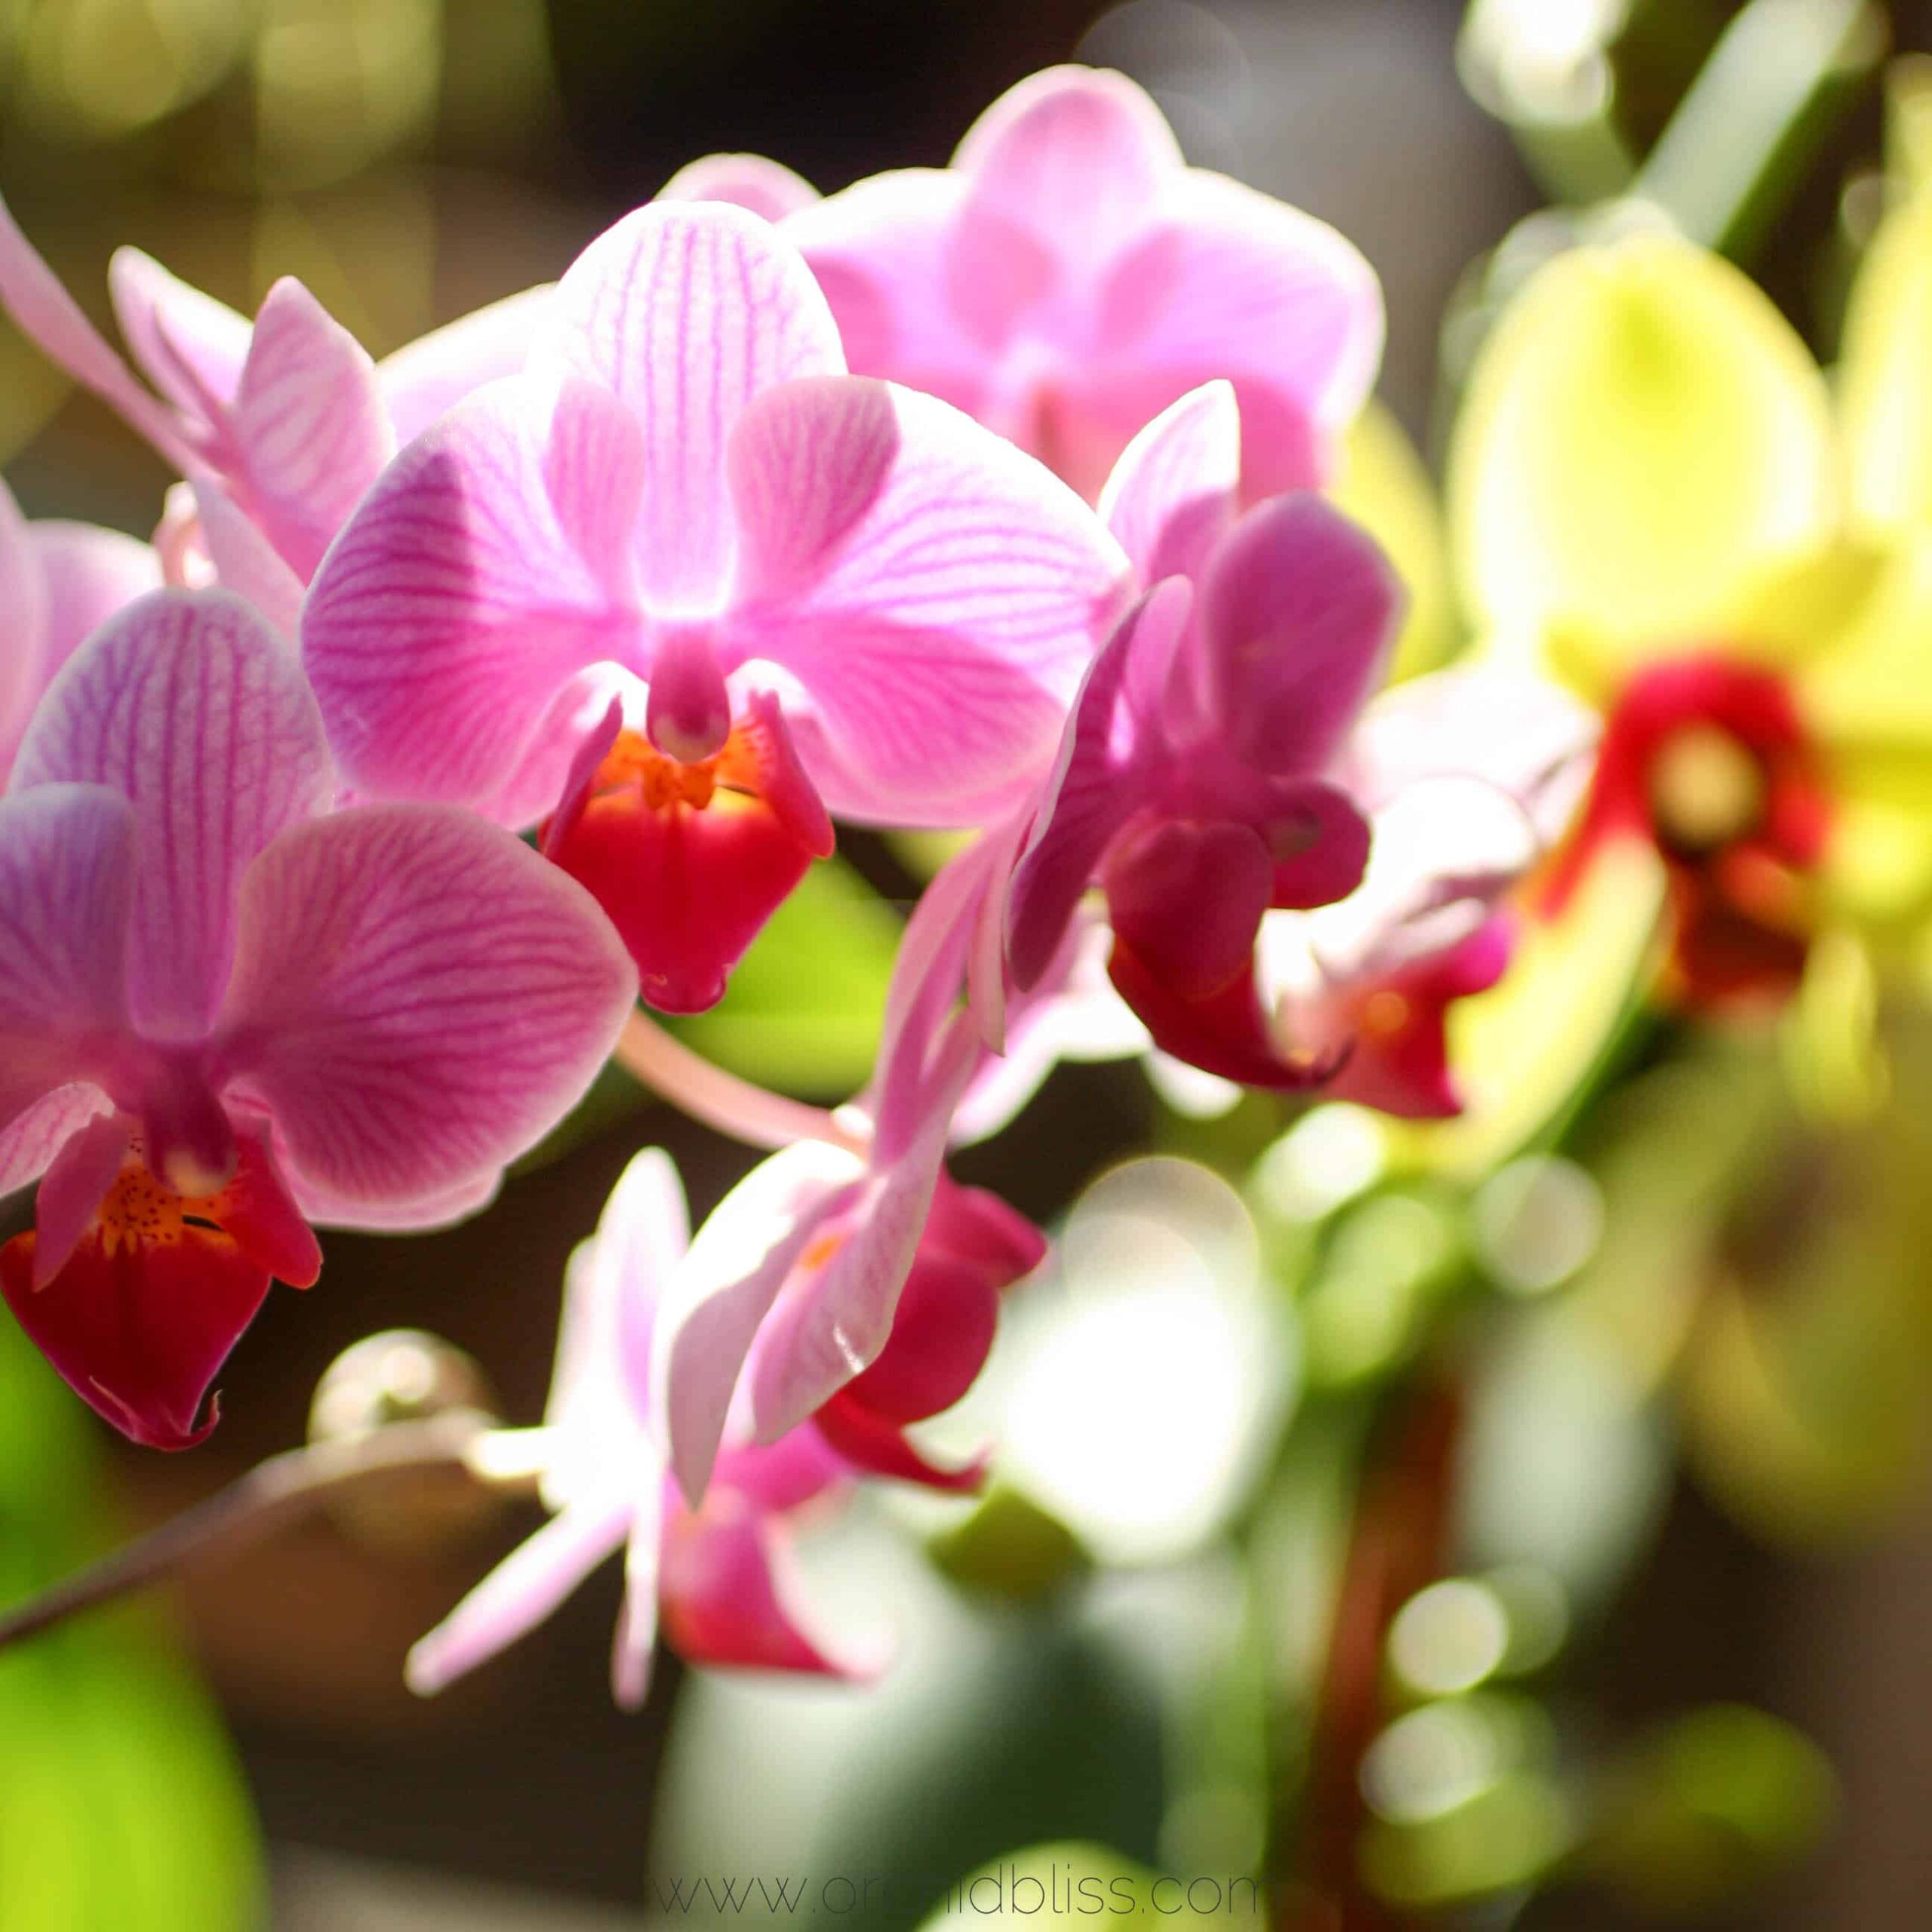 Use the Best Orchid Potting Mix to Give your Orchids a Solid Foundation for Long-Term Health